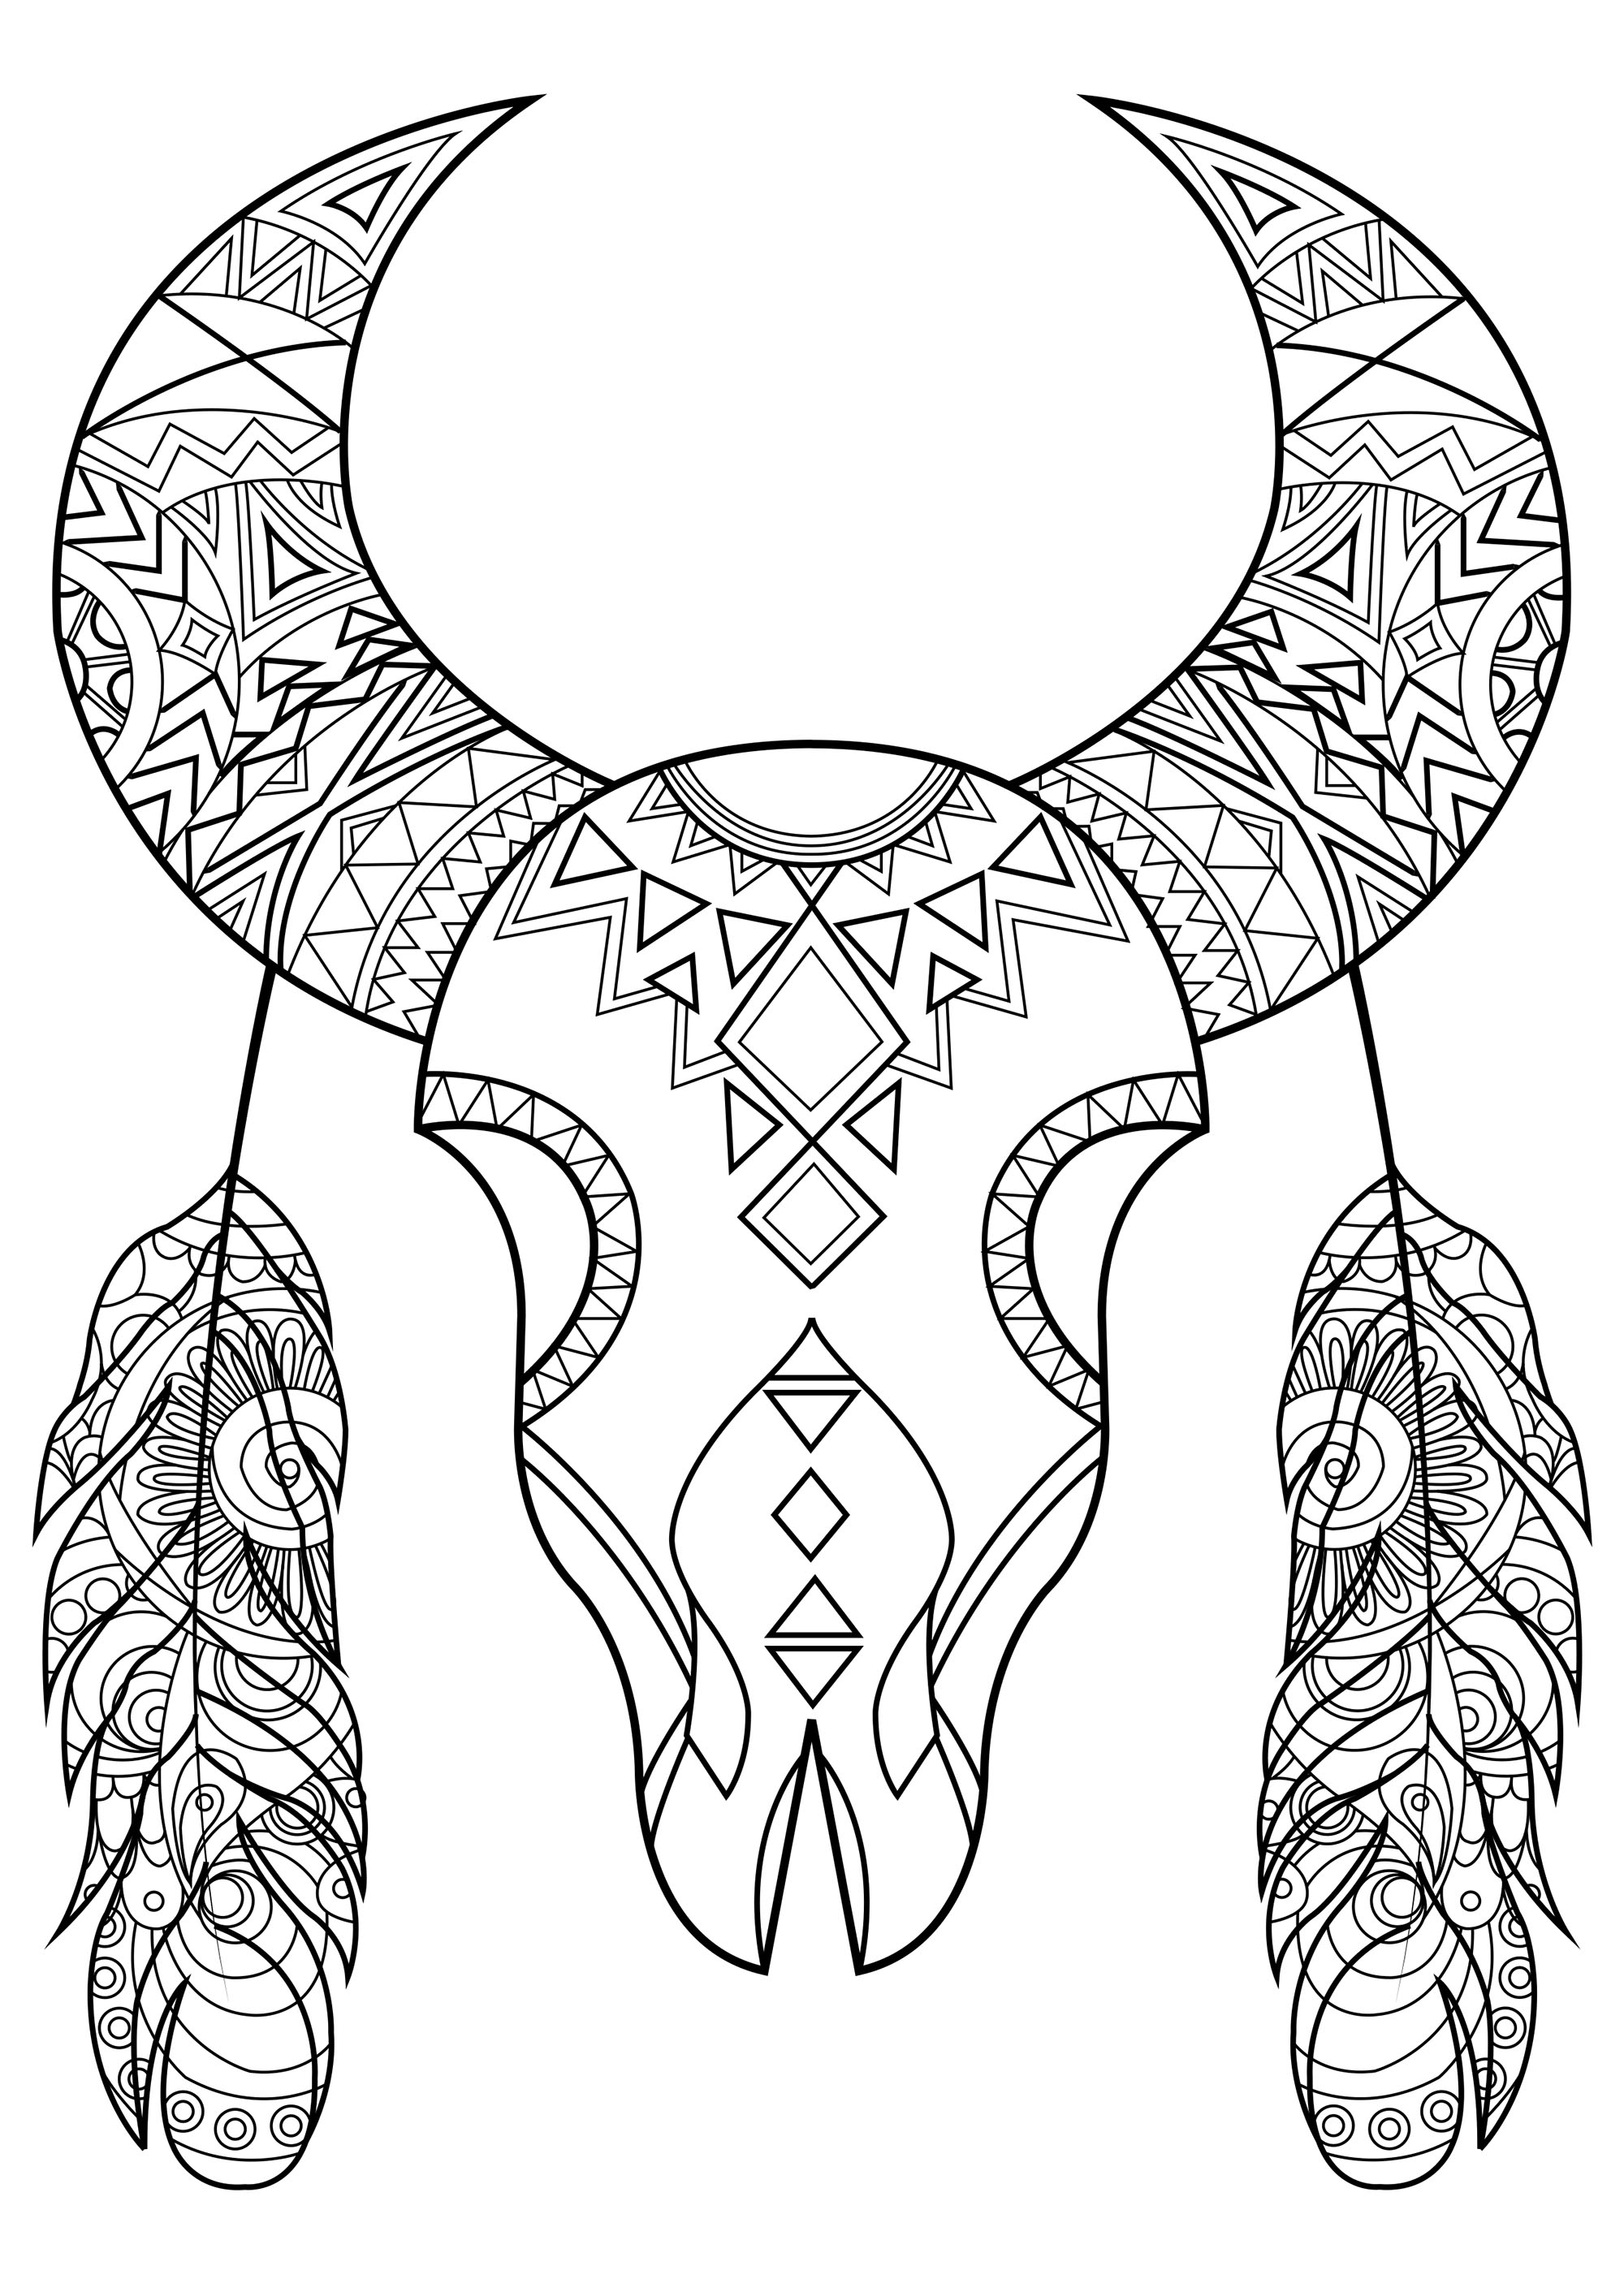 259 Animal Bull Skull Coloring Pages with Animal character